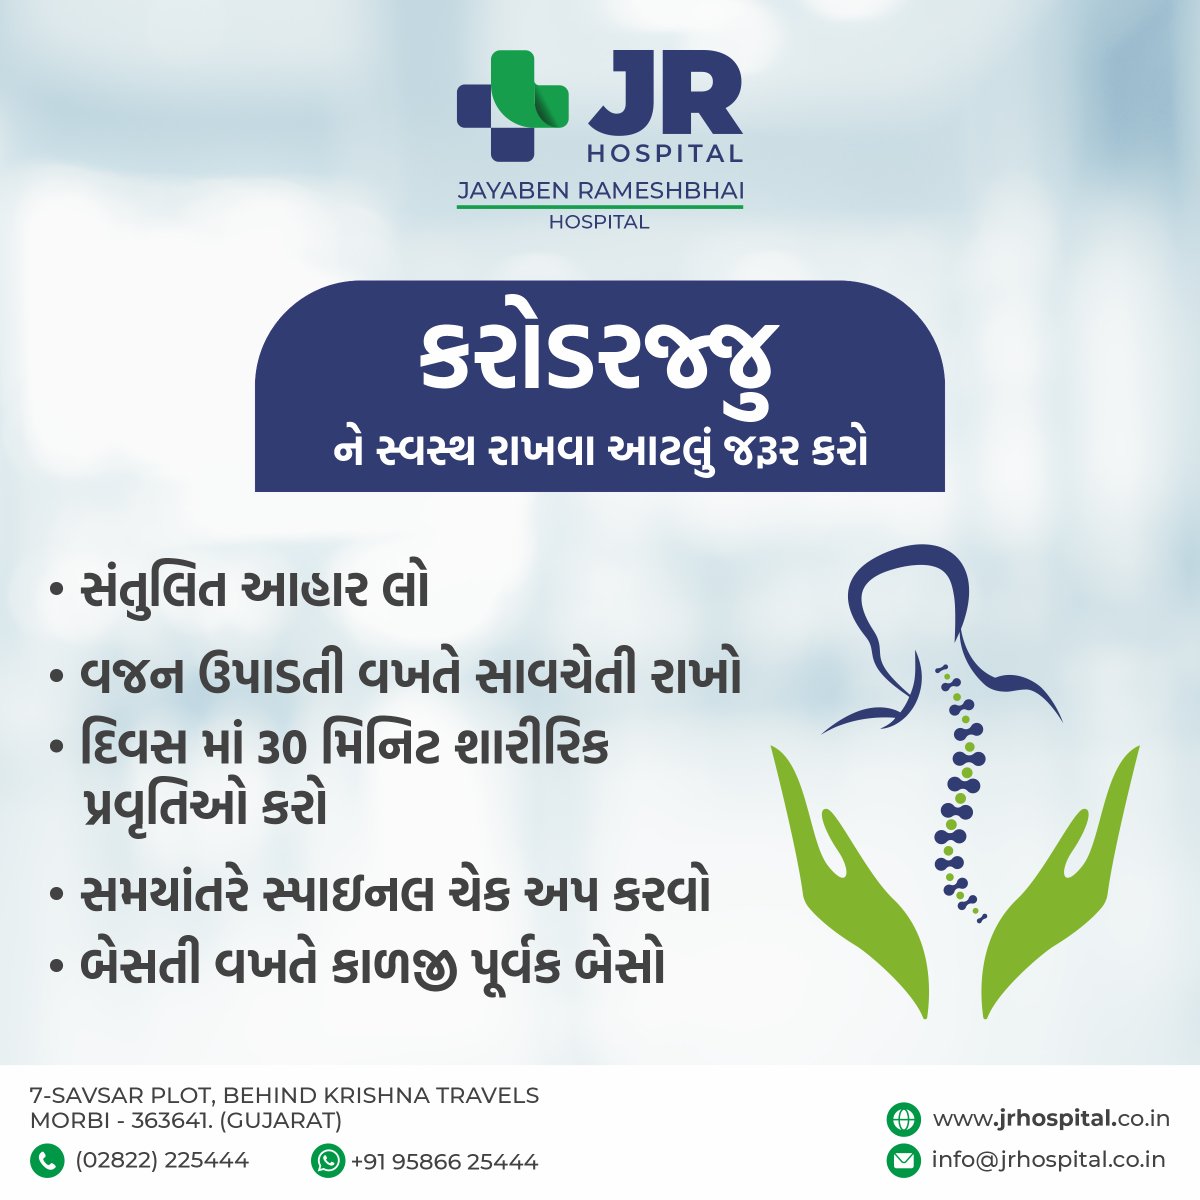 A healthy spine is a healthy life. Let's raise awareness together!
#SpineHealthAwareness
.
#JRhospital #Hospital #vitaminb12 #Morbi #ProtectYourSpine #healtheducation  #24x7 #jrhospitalmorbi #healthcarefacilities #spinetreatment #spinesurgeon #spinecare #spinepain #spineproblems